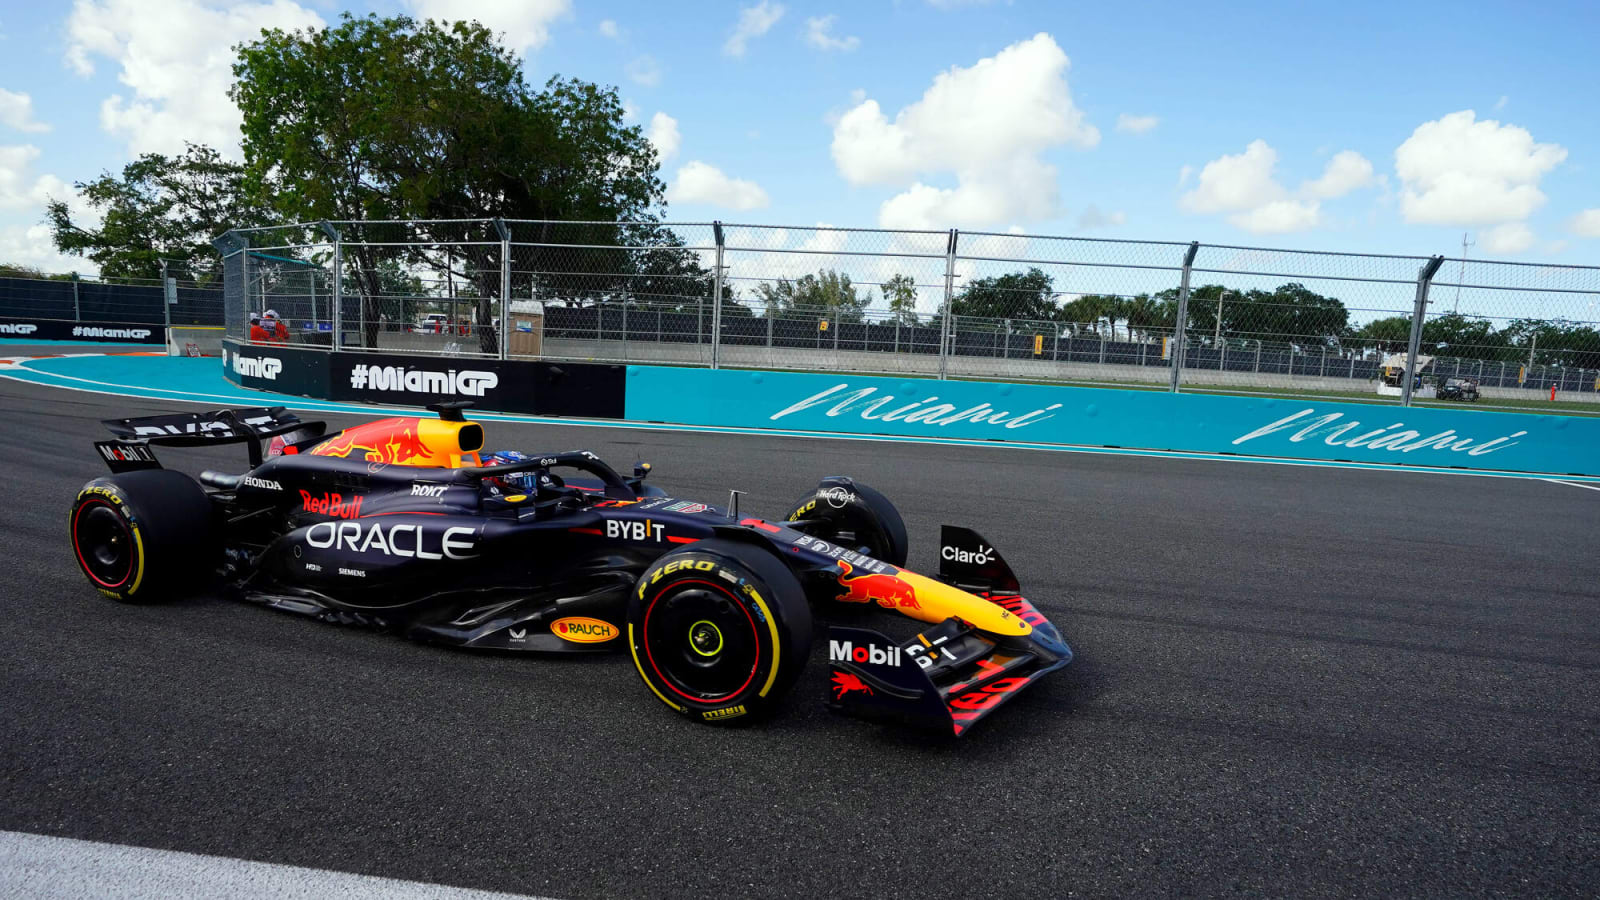 Watch: 'LOL,' Max Verstappen extremely surprised after securing pole for Miami Sprint race via a ‘terrible’ SQ3 lap